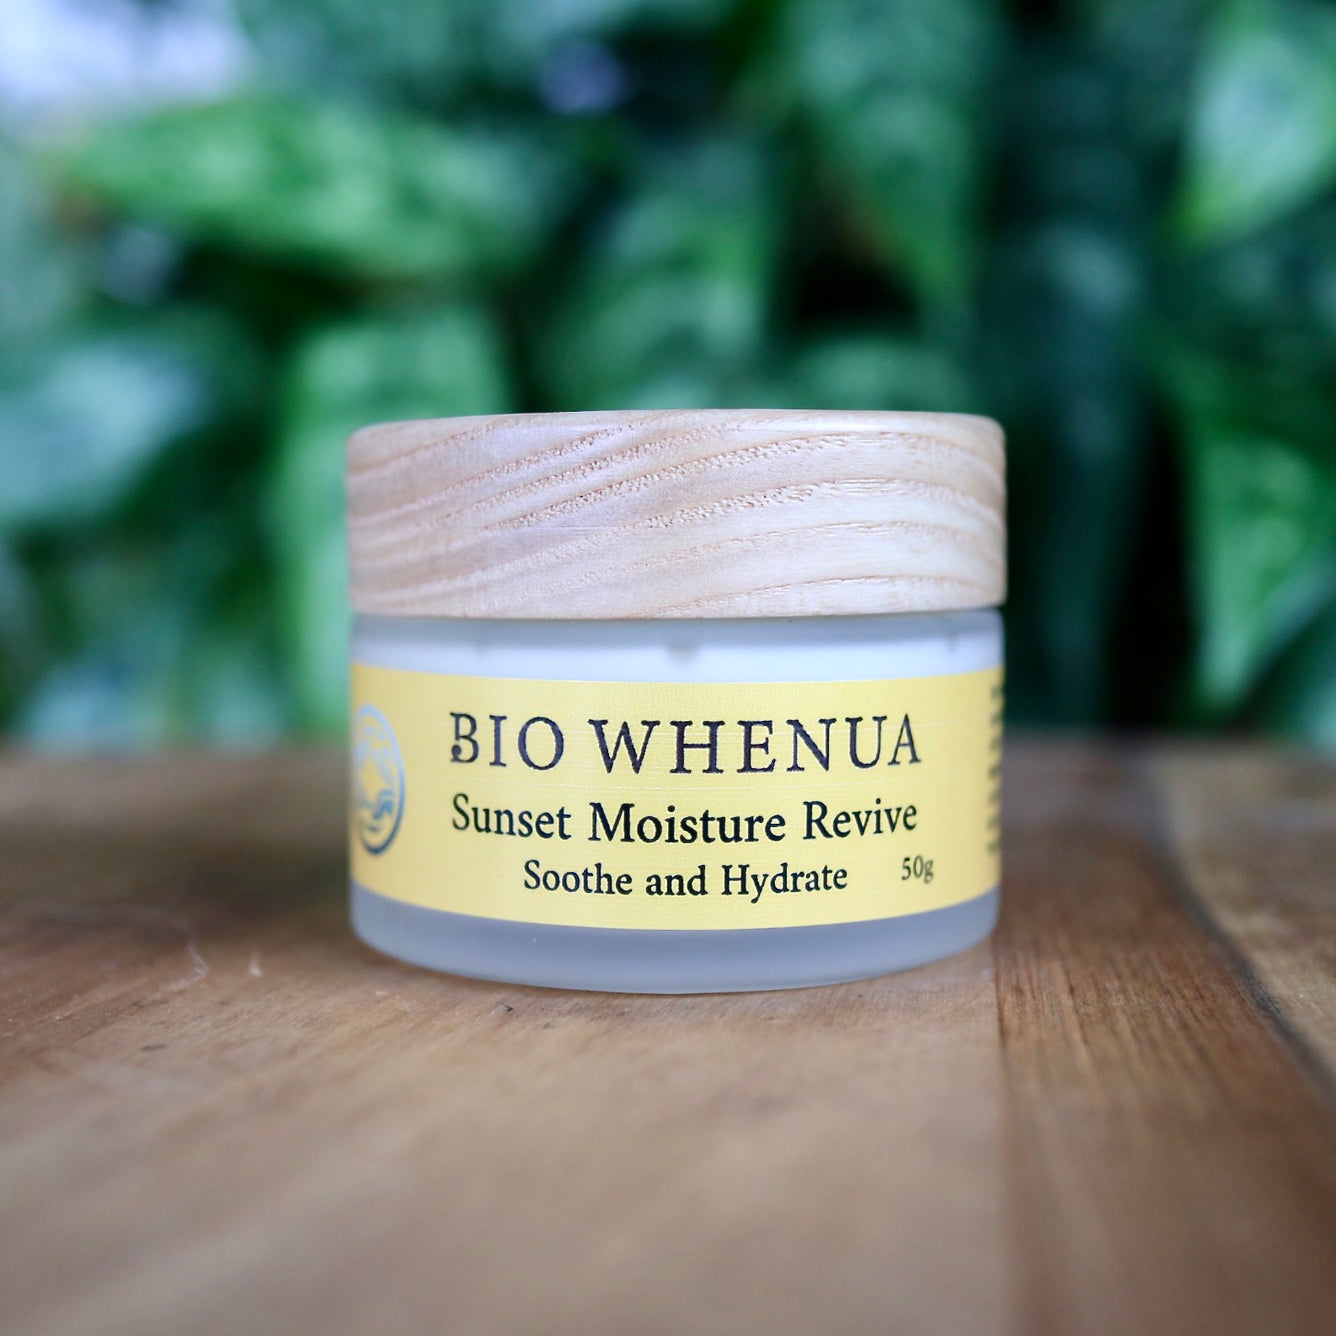 Bio Whenua Sunset Moisture Revive Soothe & Hydrate 50g